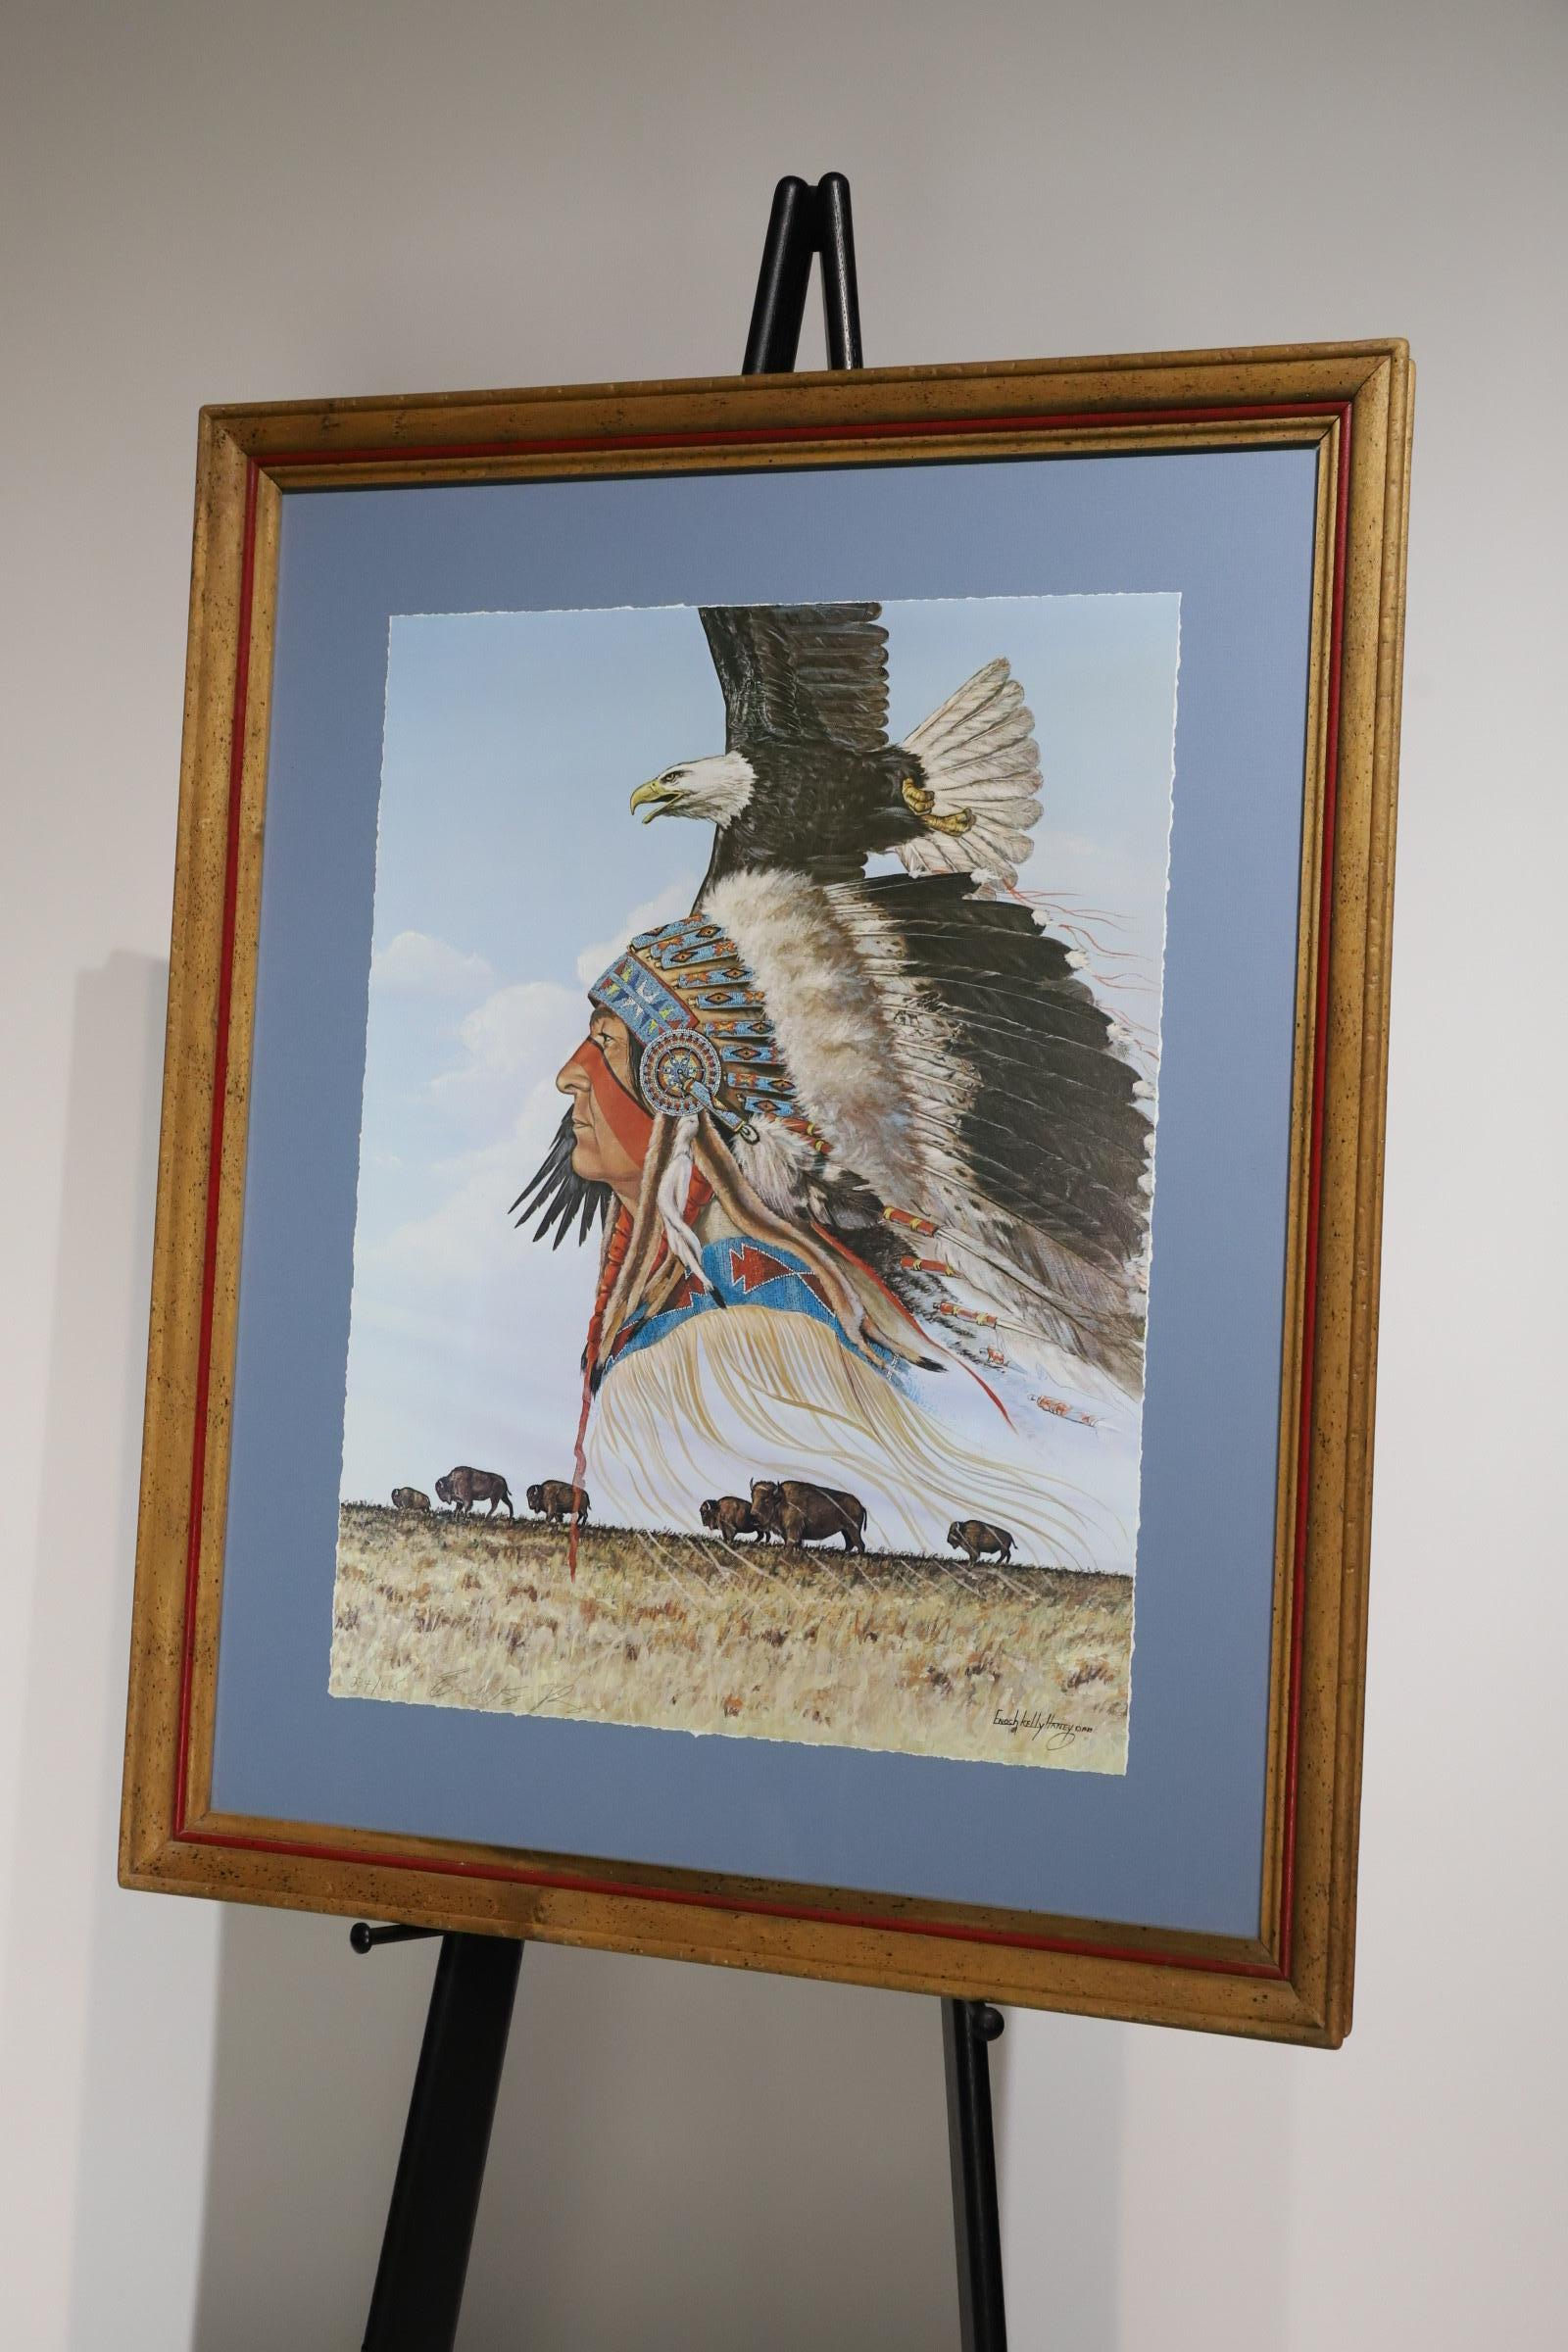 Enoch Kelly Haney's framed signed print captures the essence of Native American artistry, blending traditional themes with contemporary expression. The piece showcases Haney's mastery in intricate detailing, vibrant colors, and a profound connection